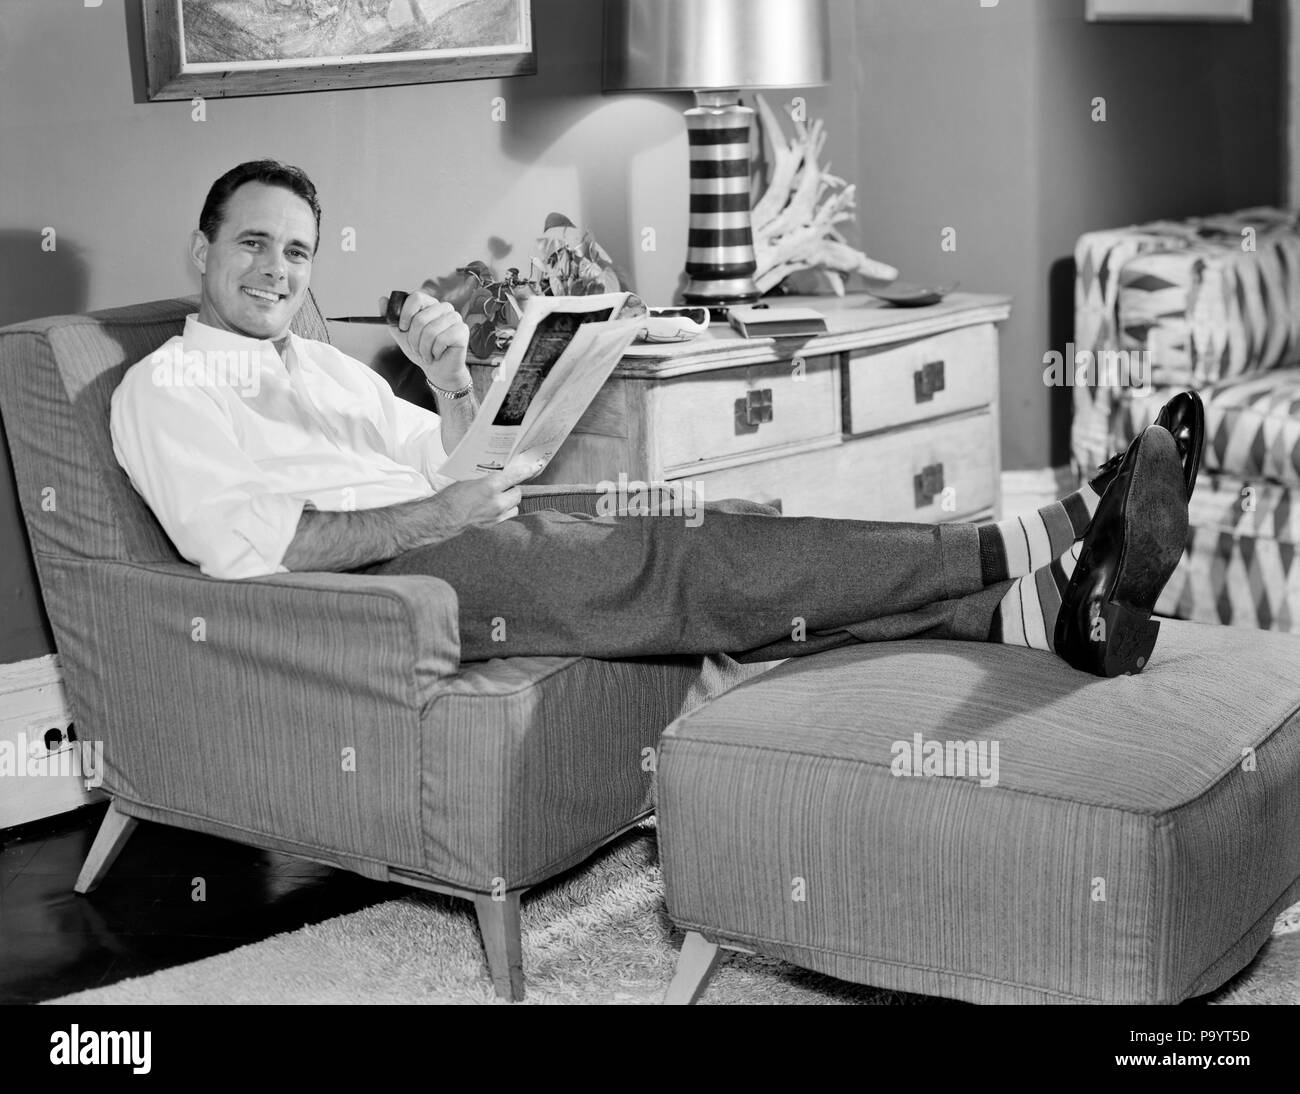 1950s RELAXED MAN SITTING IN EASY CHAIR FEET UP SMOKING PIPE READING MAGAZINE LOOKING AT CAMERA - bx016518 CAM001 HARS CAM001 SMILES EASY JOYFUL OTTOMAN STYLISH MID-ADULT MID-ADULT MAN RELAXATION BLACK AND WHITE CAUCASIAN ETHNICITY OLD FASHIONED Stock Photo